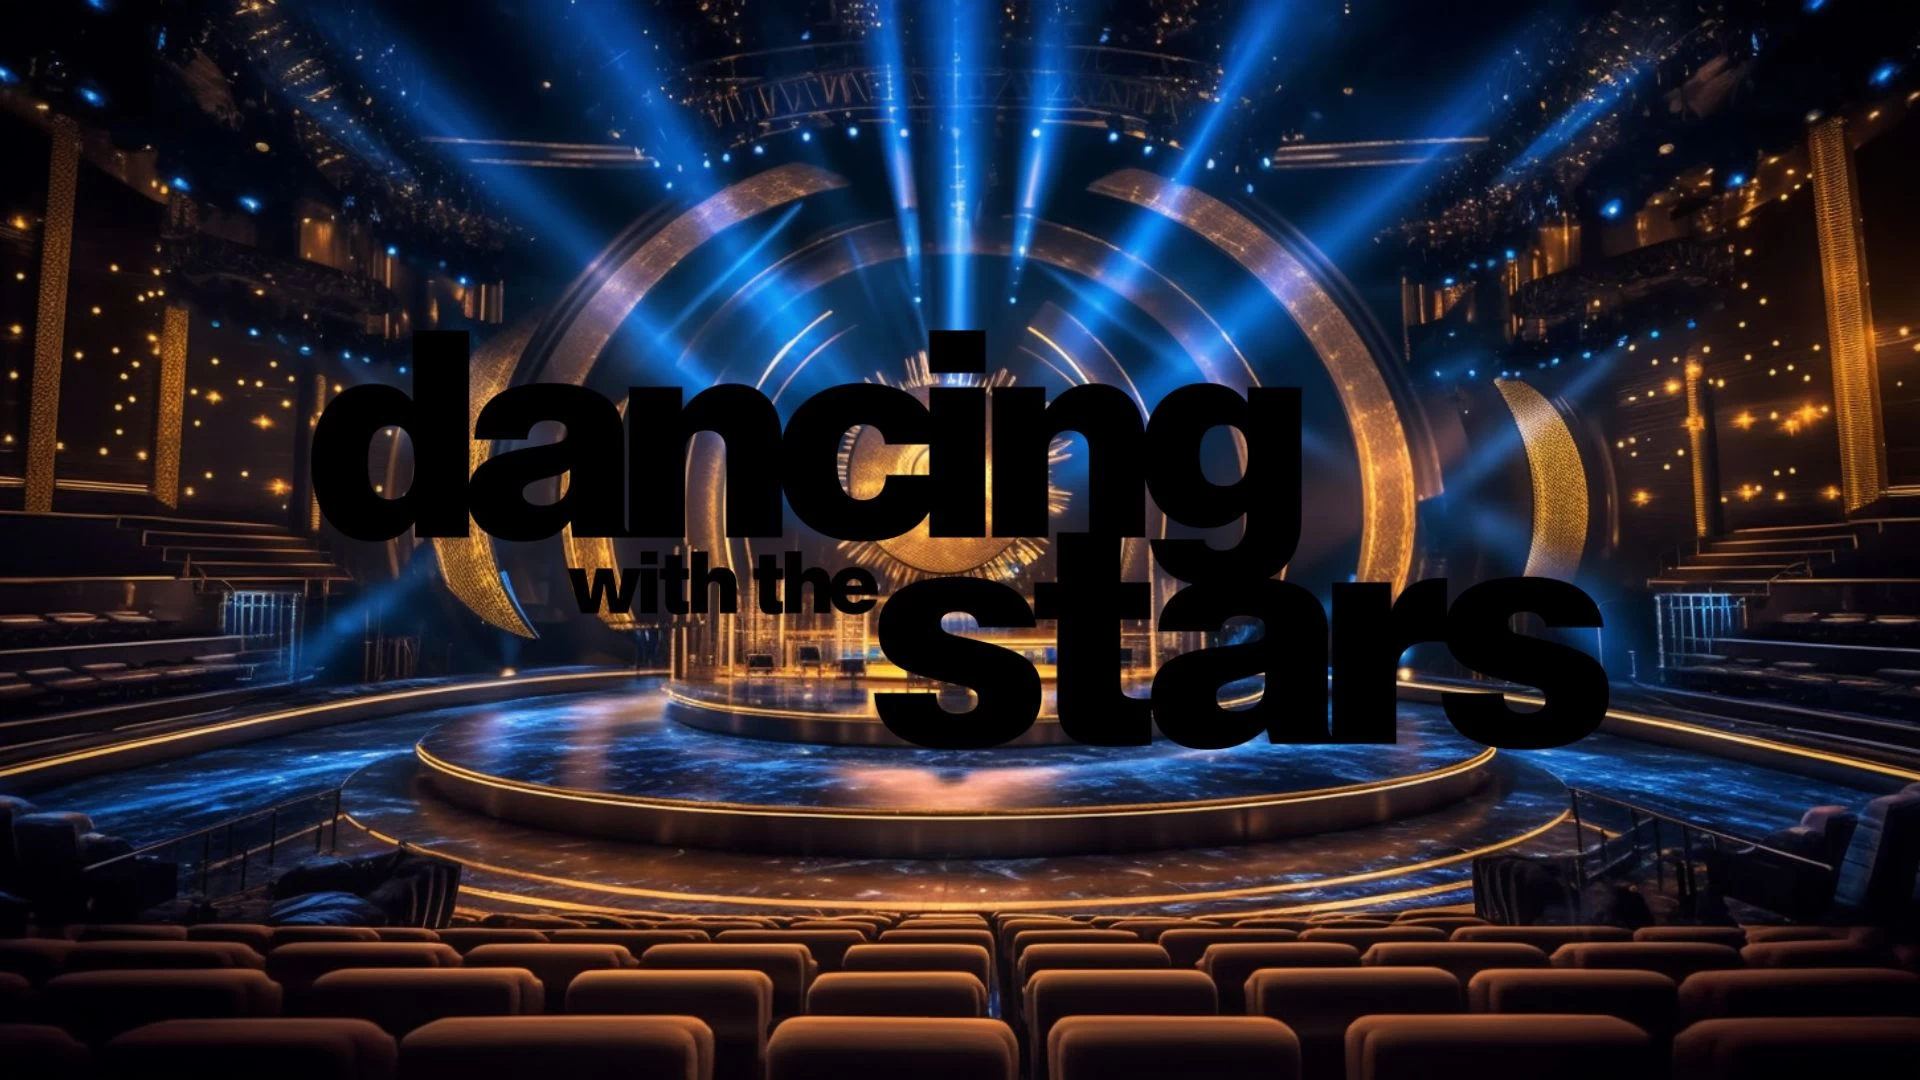 Who Got Eliminated on Dancing With the Stars Tonight? Who Went Home on Dancing With the Stars Tonight?